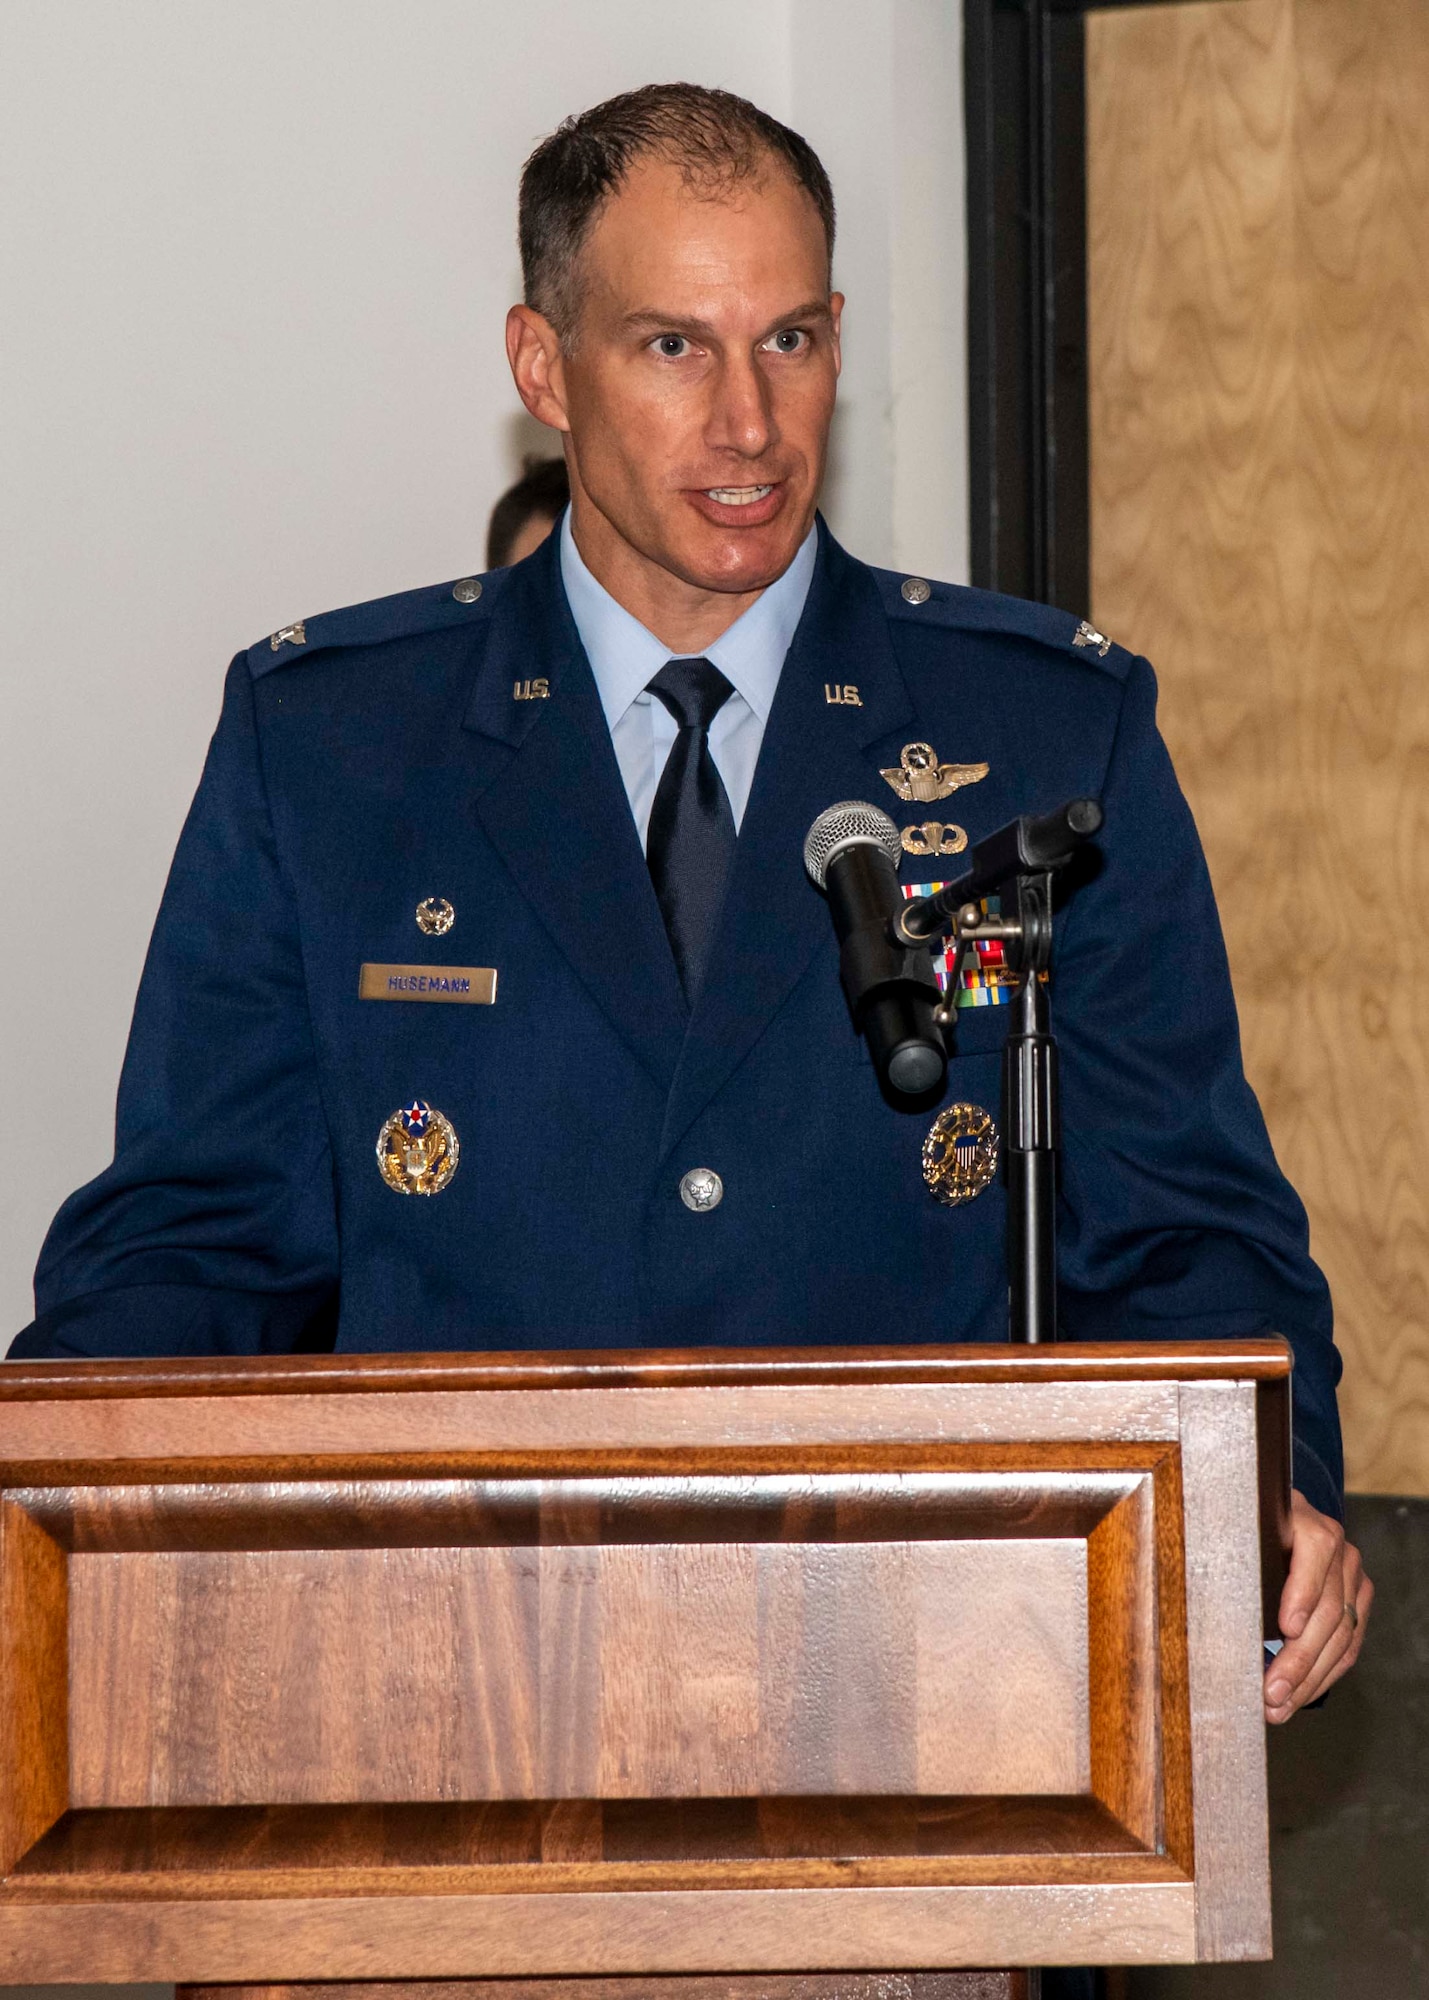 Col. Matt Husemann, 436th Airlift Wing commander, gives opening remarks during the 436th Comptroller Squadron change of command ceremony on Dover Air Force Base, Delaware, June 28, 2021. The ceremony saw outgoing commander, Maj. Kevin Byram, relinquish command to Lt. Col. Gretchen Lewis. (U.S. Air Force photo by Airman 1st Class Stephani Barge)